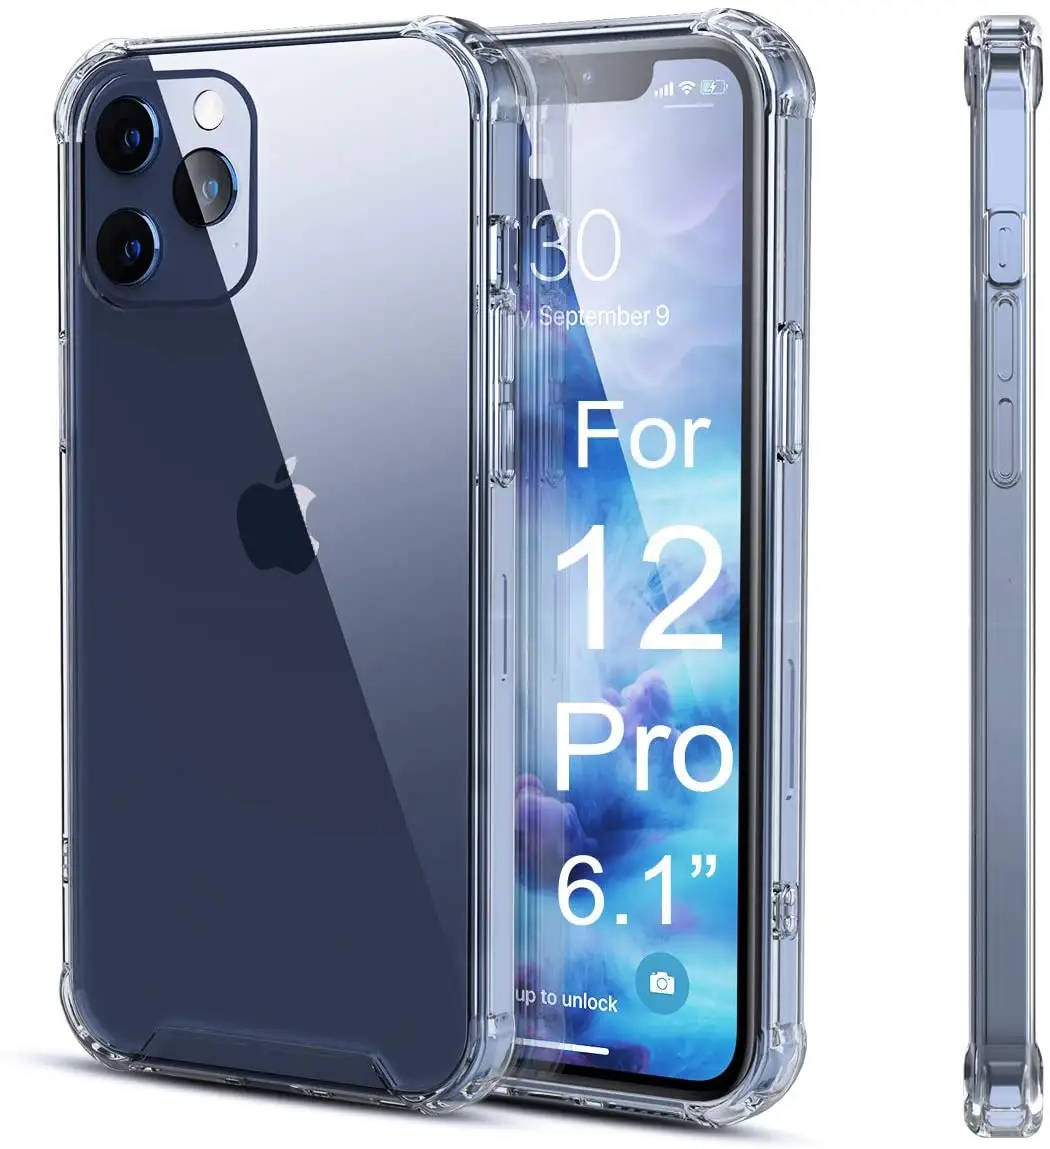 For Iphone 12 Case Shockproof,HOCAYU Thin Transparent Crystal Clear Tpu Bumper Phone Case Back Cover For iPhone 11 12 Pro Max